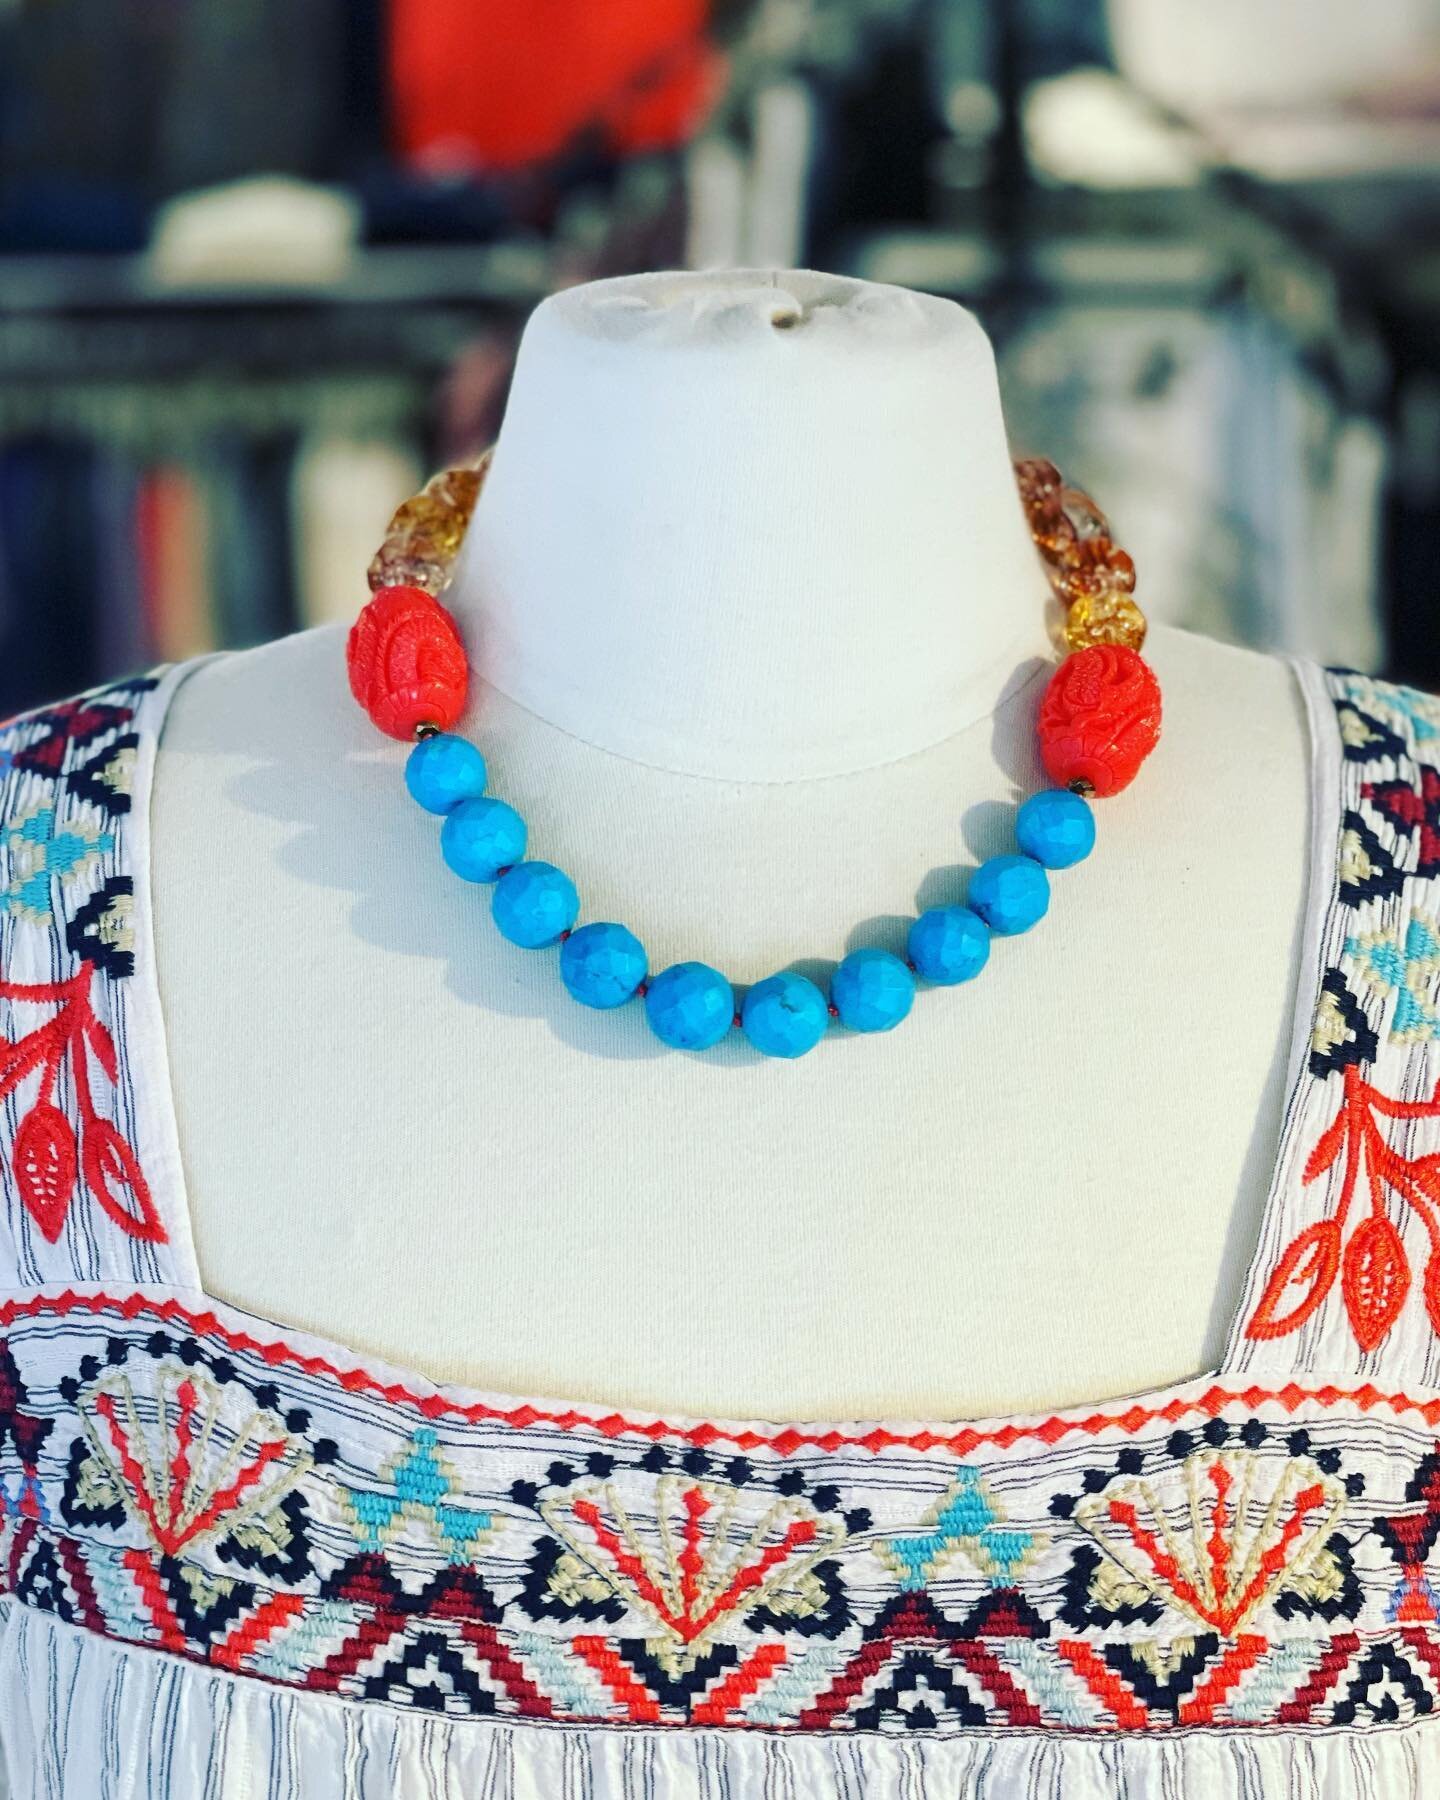 Add one of these fun summer MTL necklaces to your @incompanyclothing wardrobe! 
New pieces in store now!

#wardrobeessentials #jewelry #mtljewelrydesign #necklace #custom #customjewelry #artistsofinstagram #art #vt #vermontartist #stowevermont #local